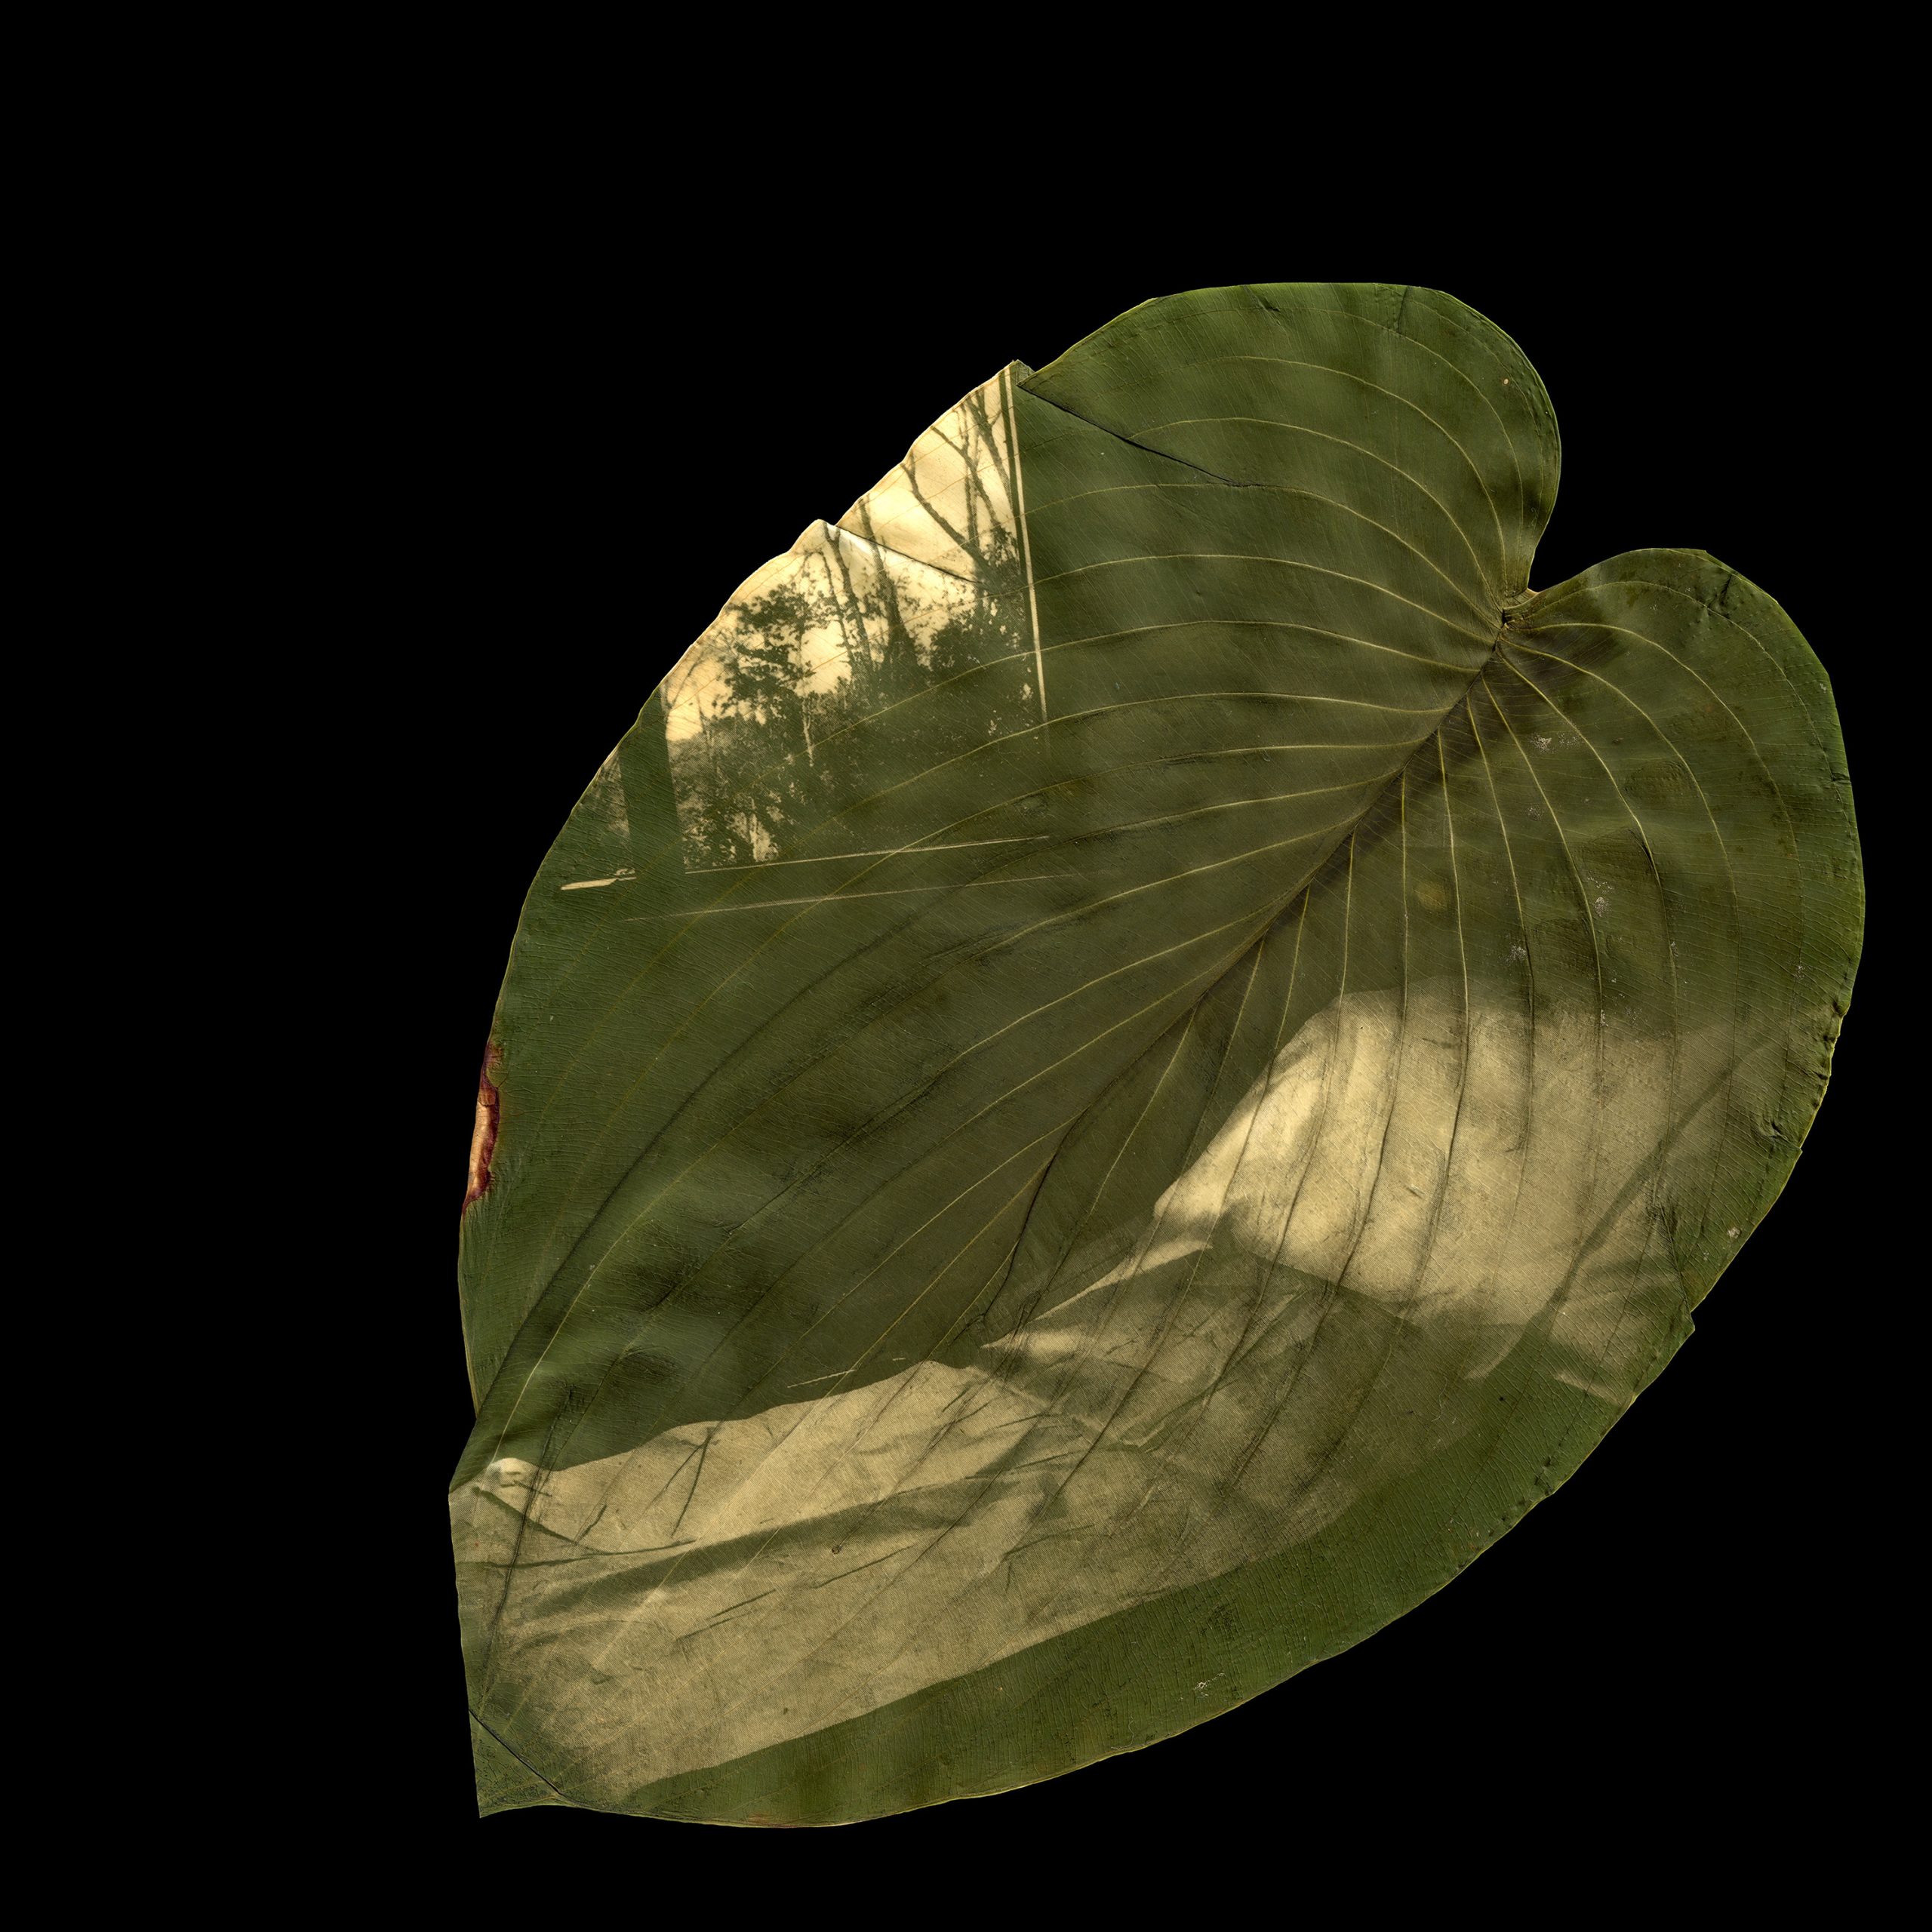 A heart-shaped hosta leaf on a black background. Printed in the chlorophyll is an empty hospital bed, lit by the natural light of a nearby window.